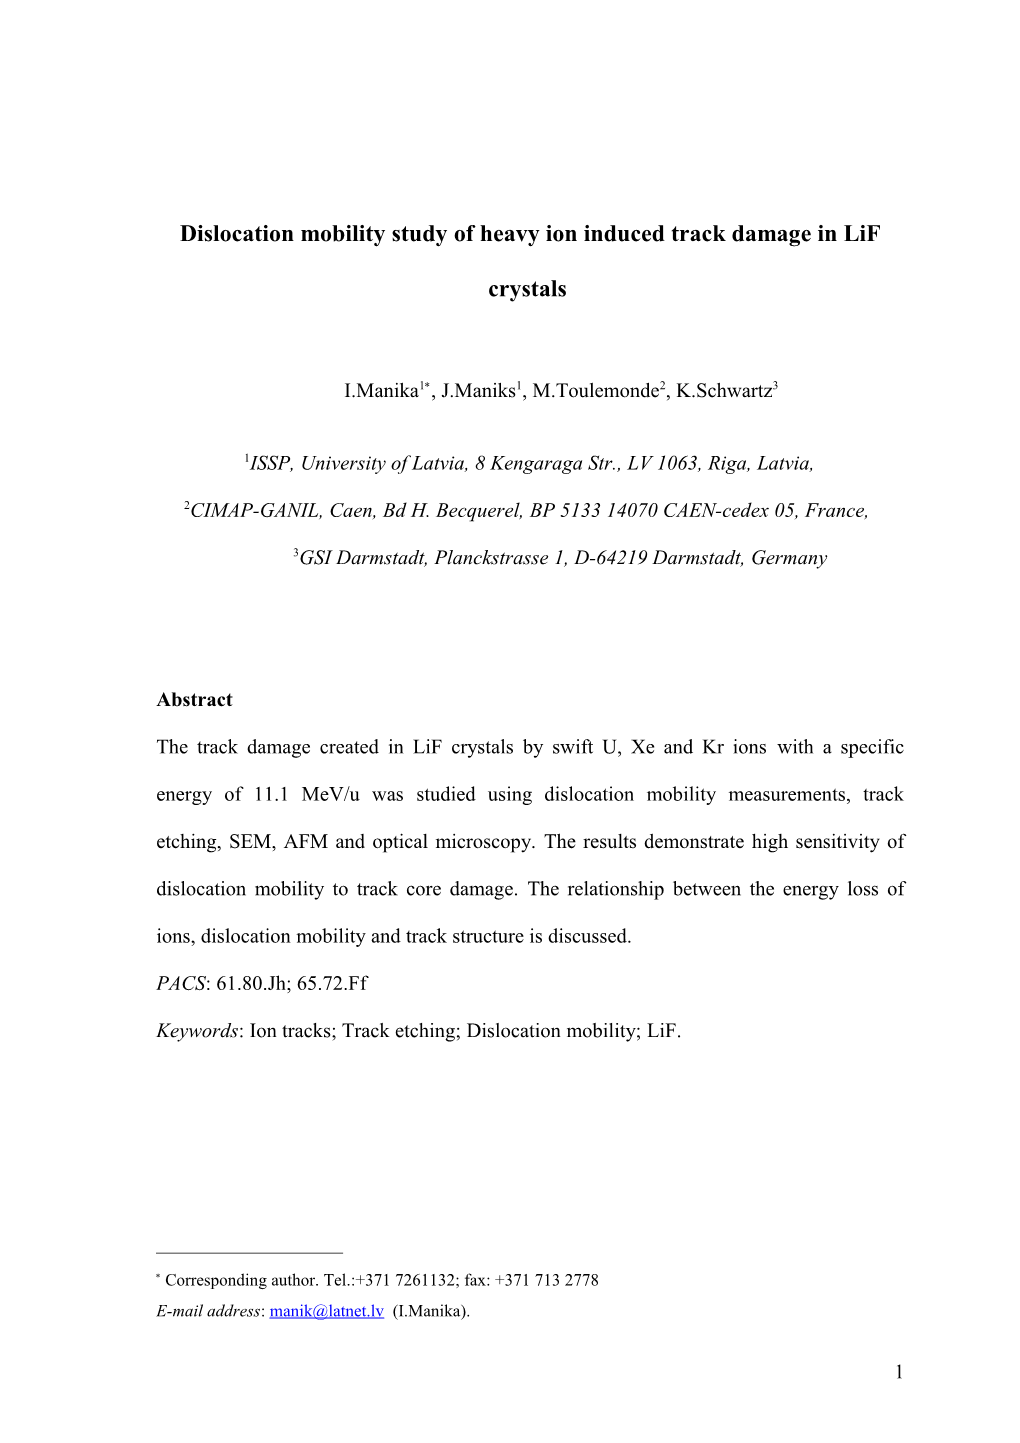 Dislocation Mobility Study of Heavy Ion Induced Track Damage in Lif Crystals